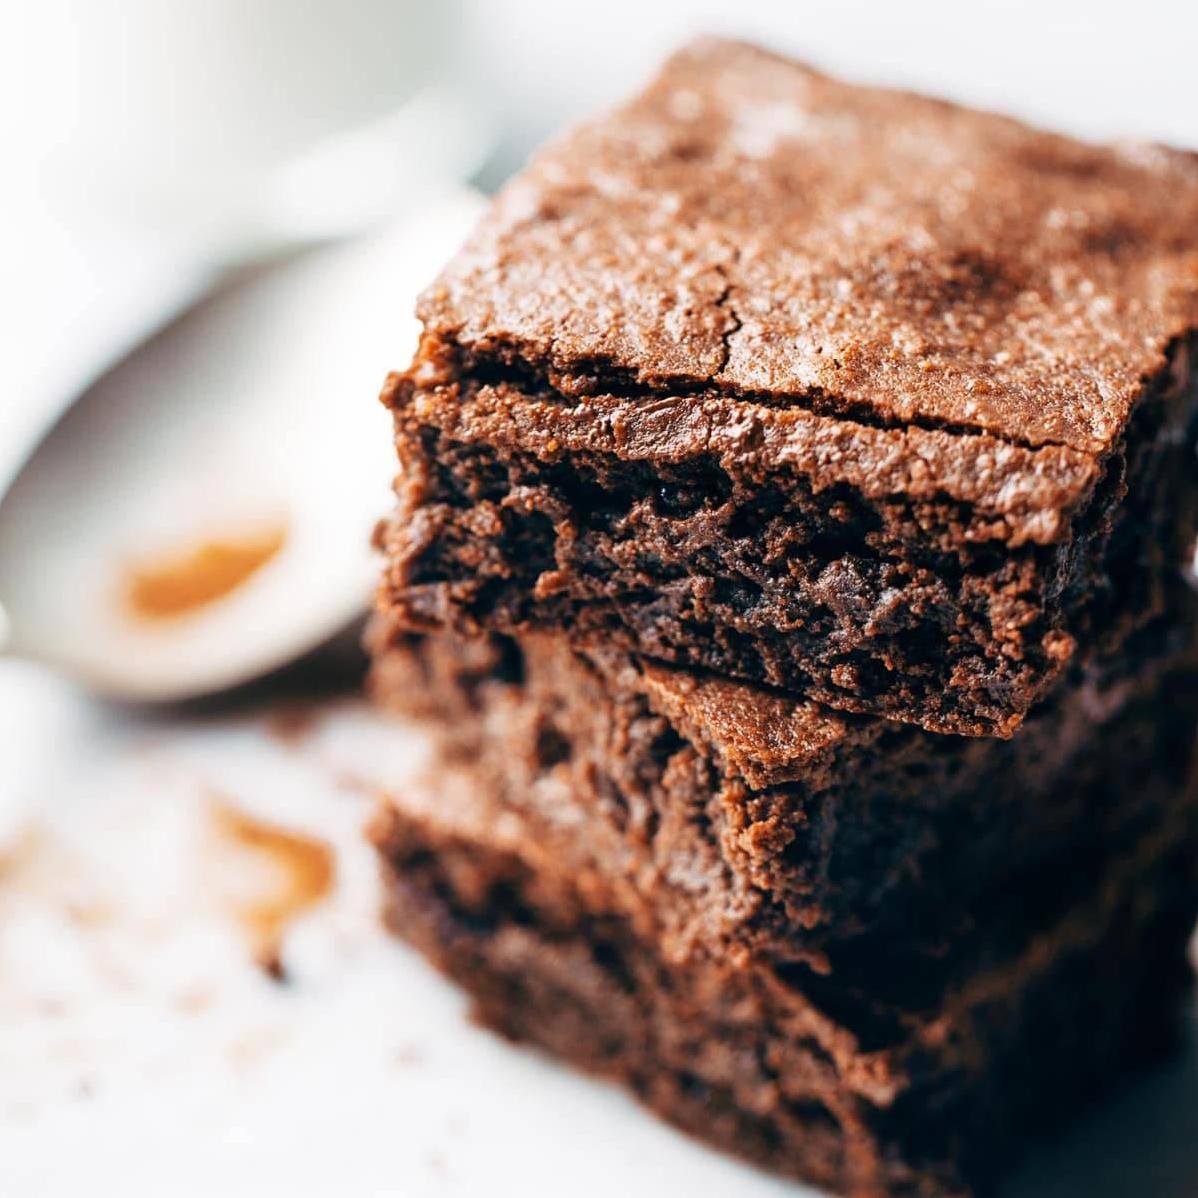  These brownies are perfect for a morning pick-me-up or